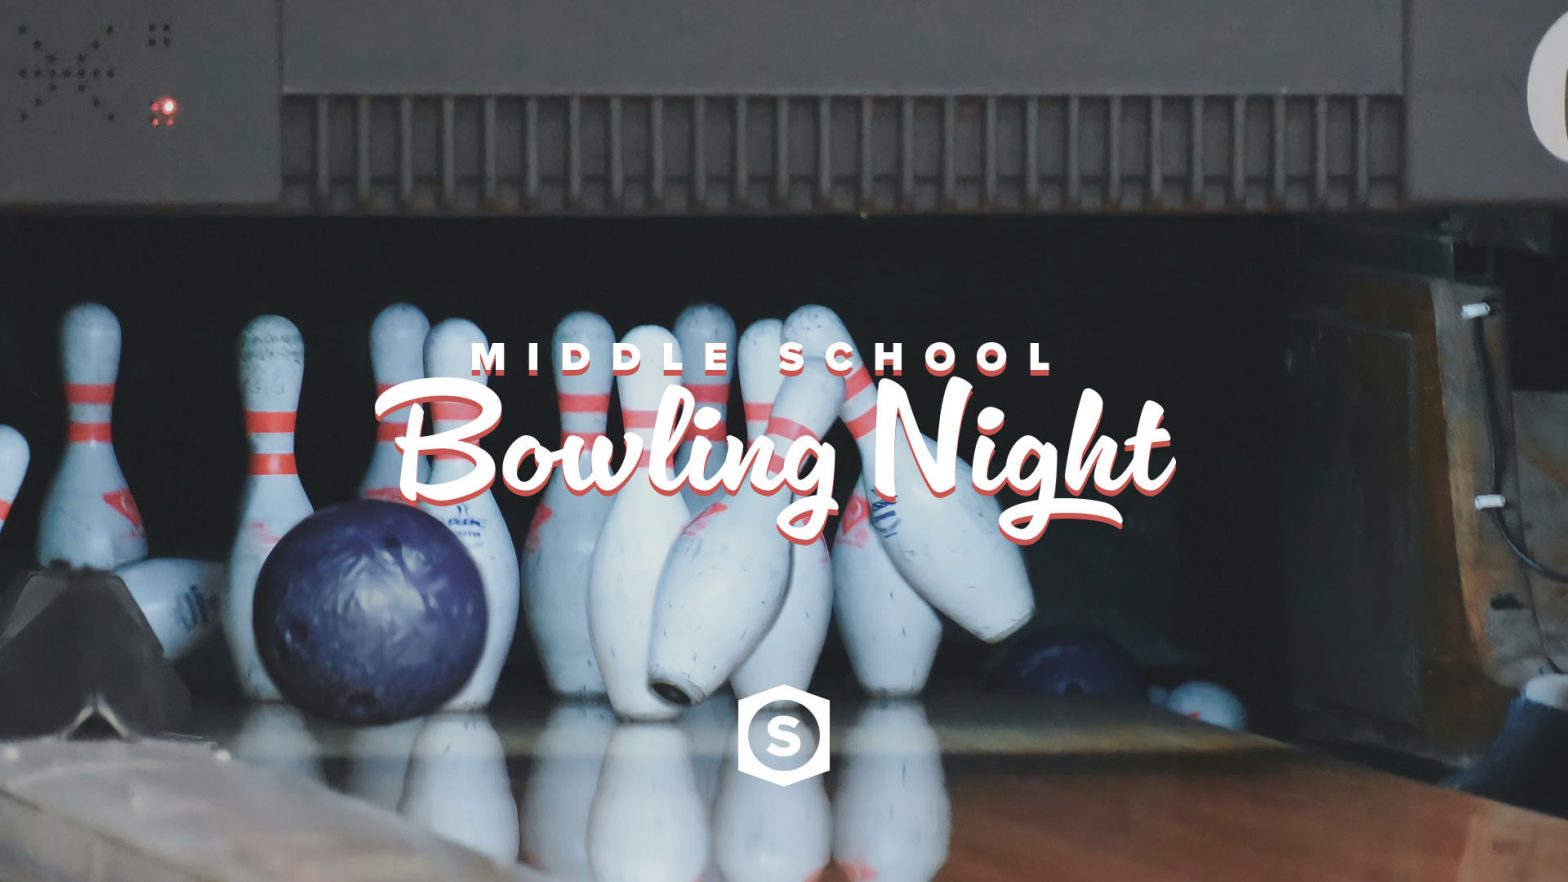 MS Bowling Night event image